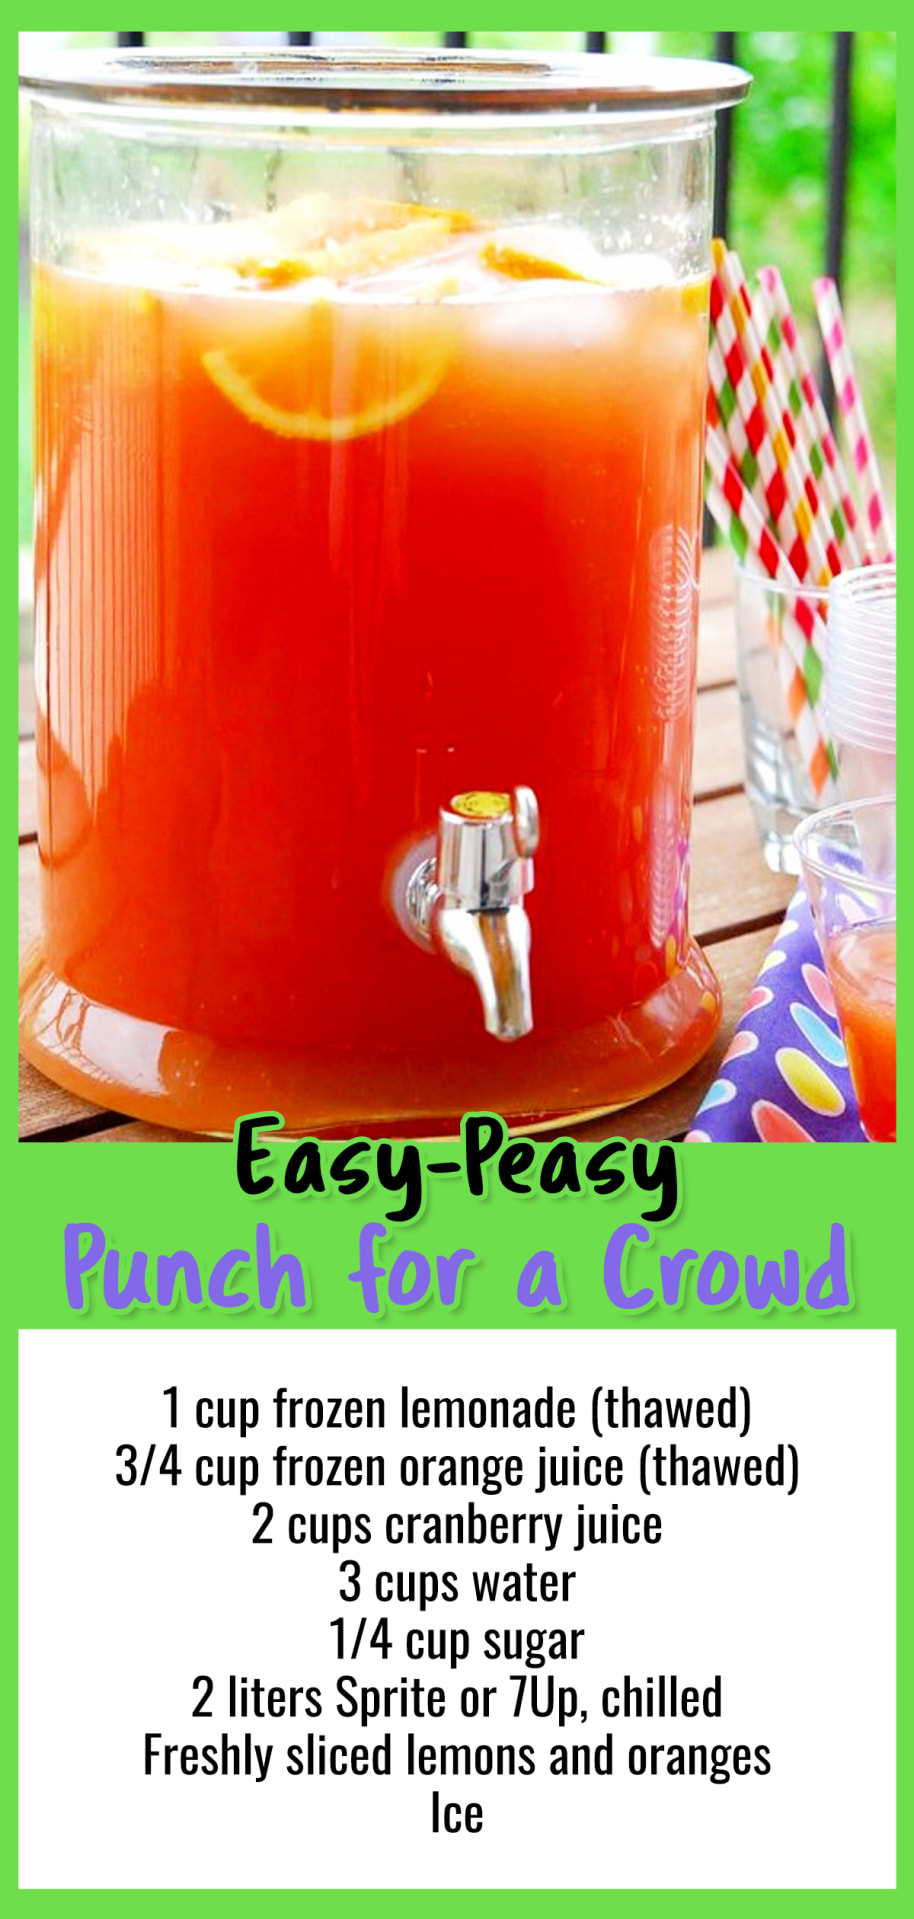 Easy Punch for a Crowd - Easy Punch Recipes for a Crowd and Easy Party Drinks Ideas - Cranberry Vodka Punch, Pineapple Orange Juice Alcoholic Drinks, Punch for 50 and Simple Punch Recipes for a Crowd, Party, Brunch, Cookout or Bridal Shower - non-alcoholic punch recipes and simple alcoholic punch recipes, non-alcoholic holiday punch, easy fruit punch recipes, easy punch recipes with sprite and pineapple juice, jungle juice recipe with fruit